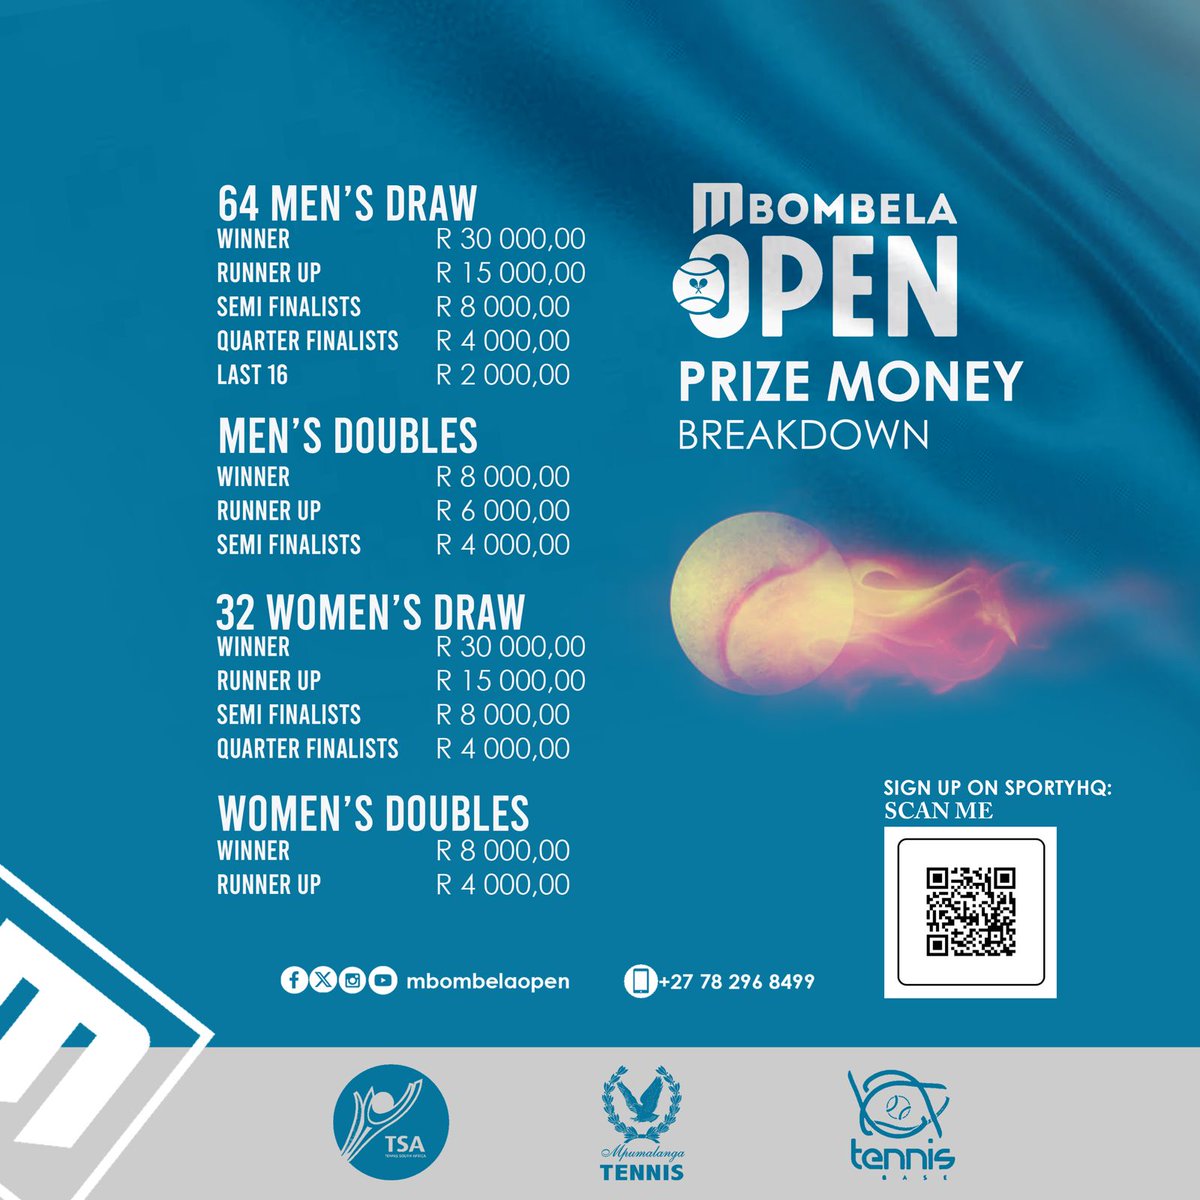 Have you signed up for the @MbombelaOpen yet? Don't miss out!

Enter before the entry deadline this Friday, April 26th. This tournament boasts a huge R200,000 prize pool!

To enter, click here 👉 tsa.sportyhq.com/tournament/vie…

#MbombelaOpen